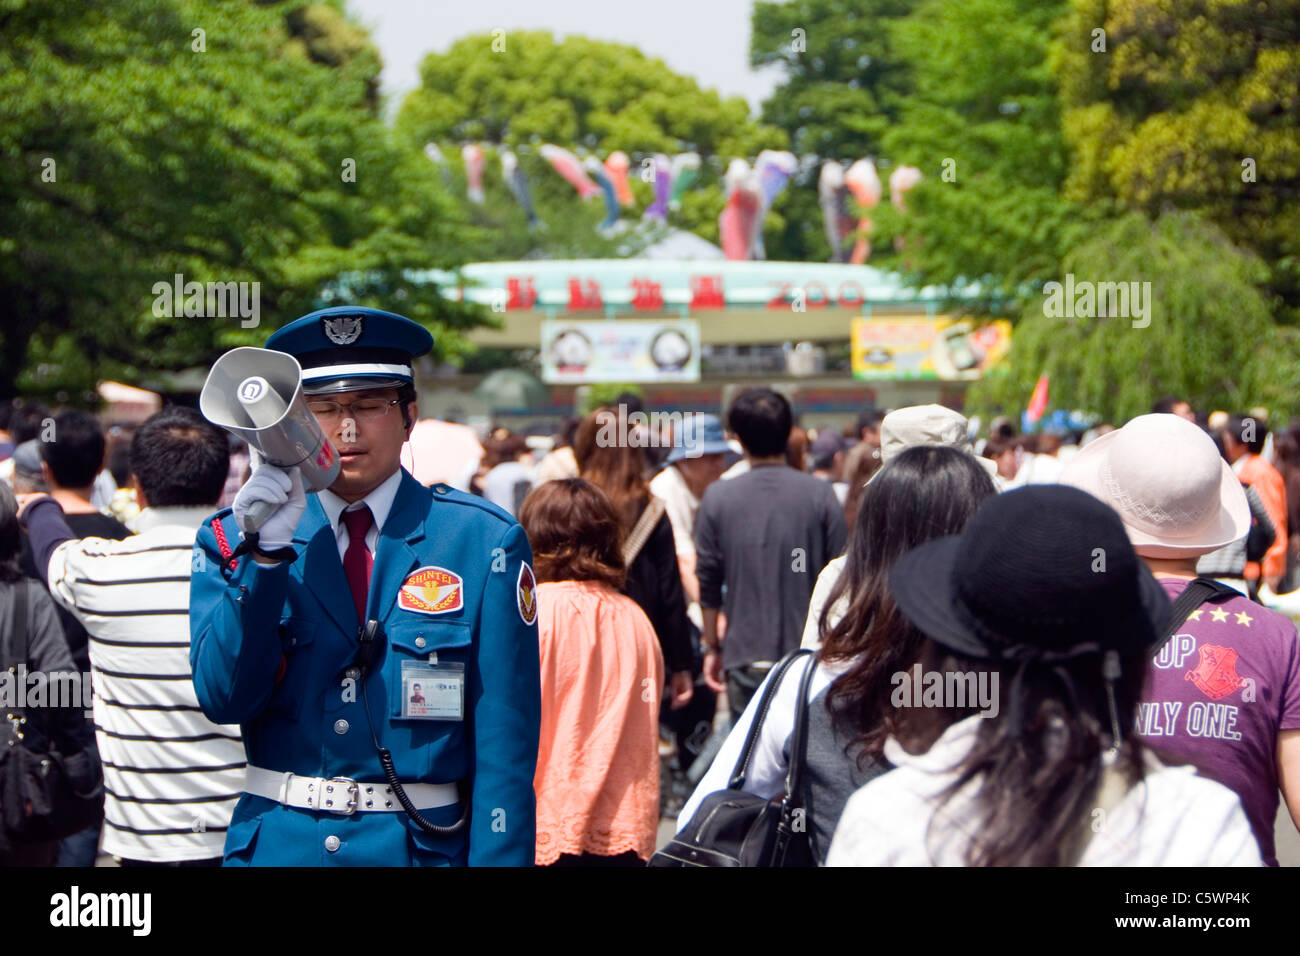 Zoo official addressing a crowd at Ueno Park, Tokyo, Japan. Stock Photo